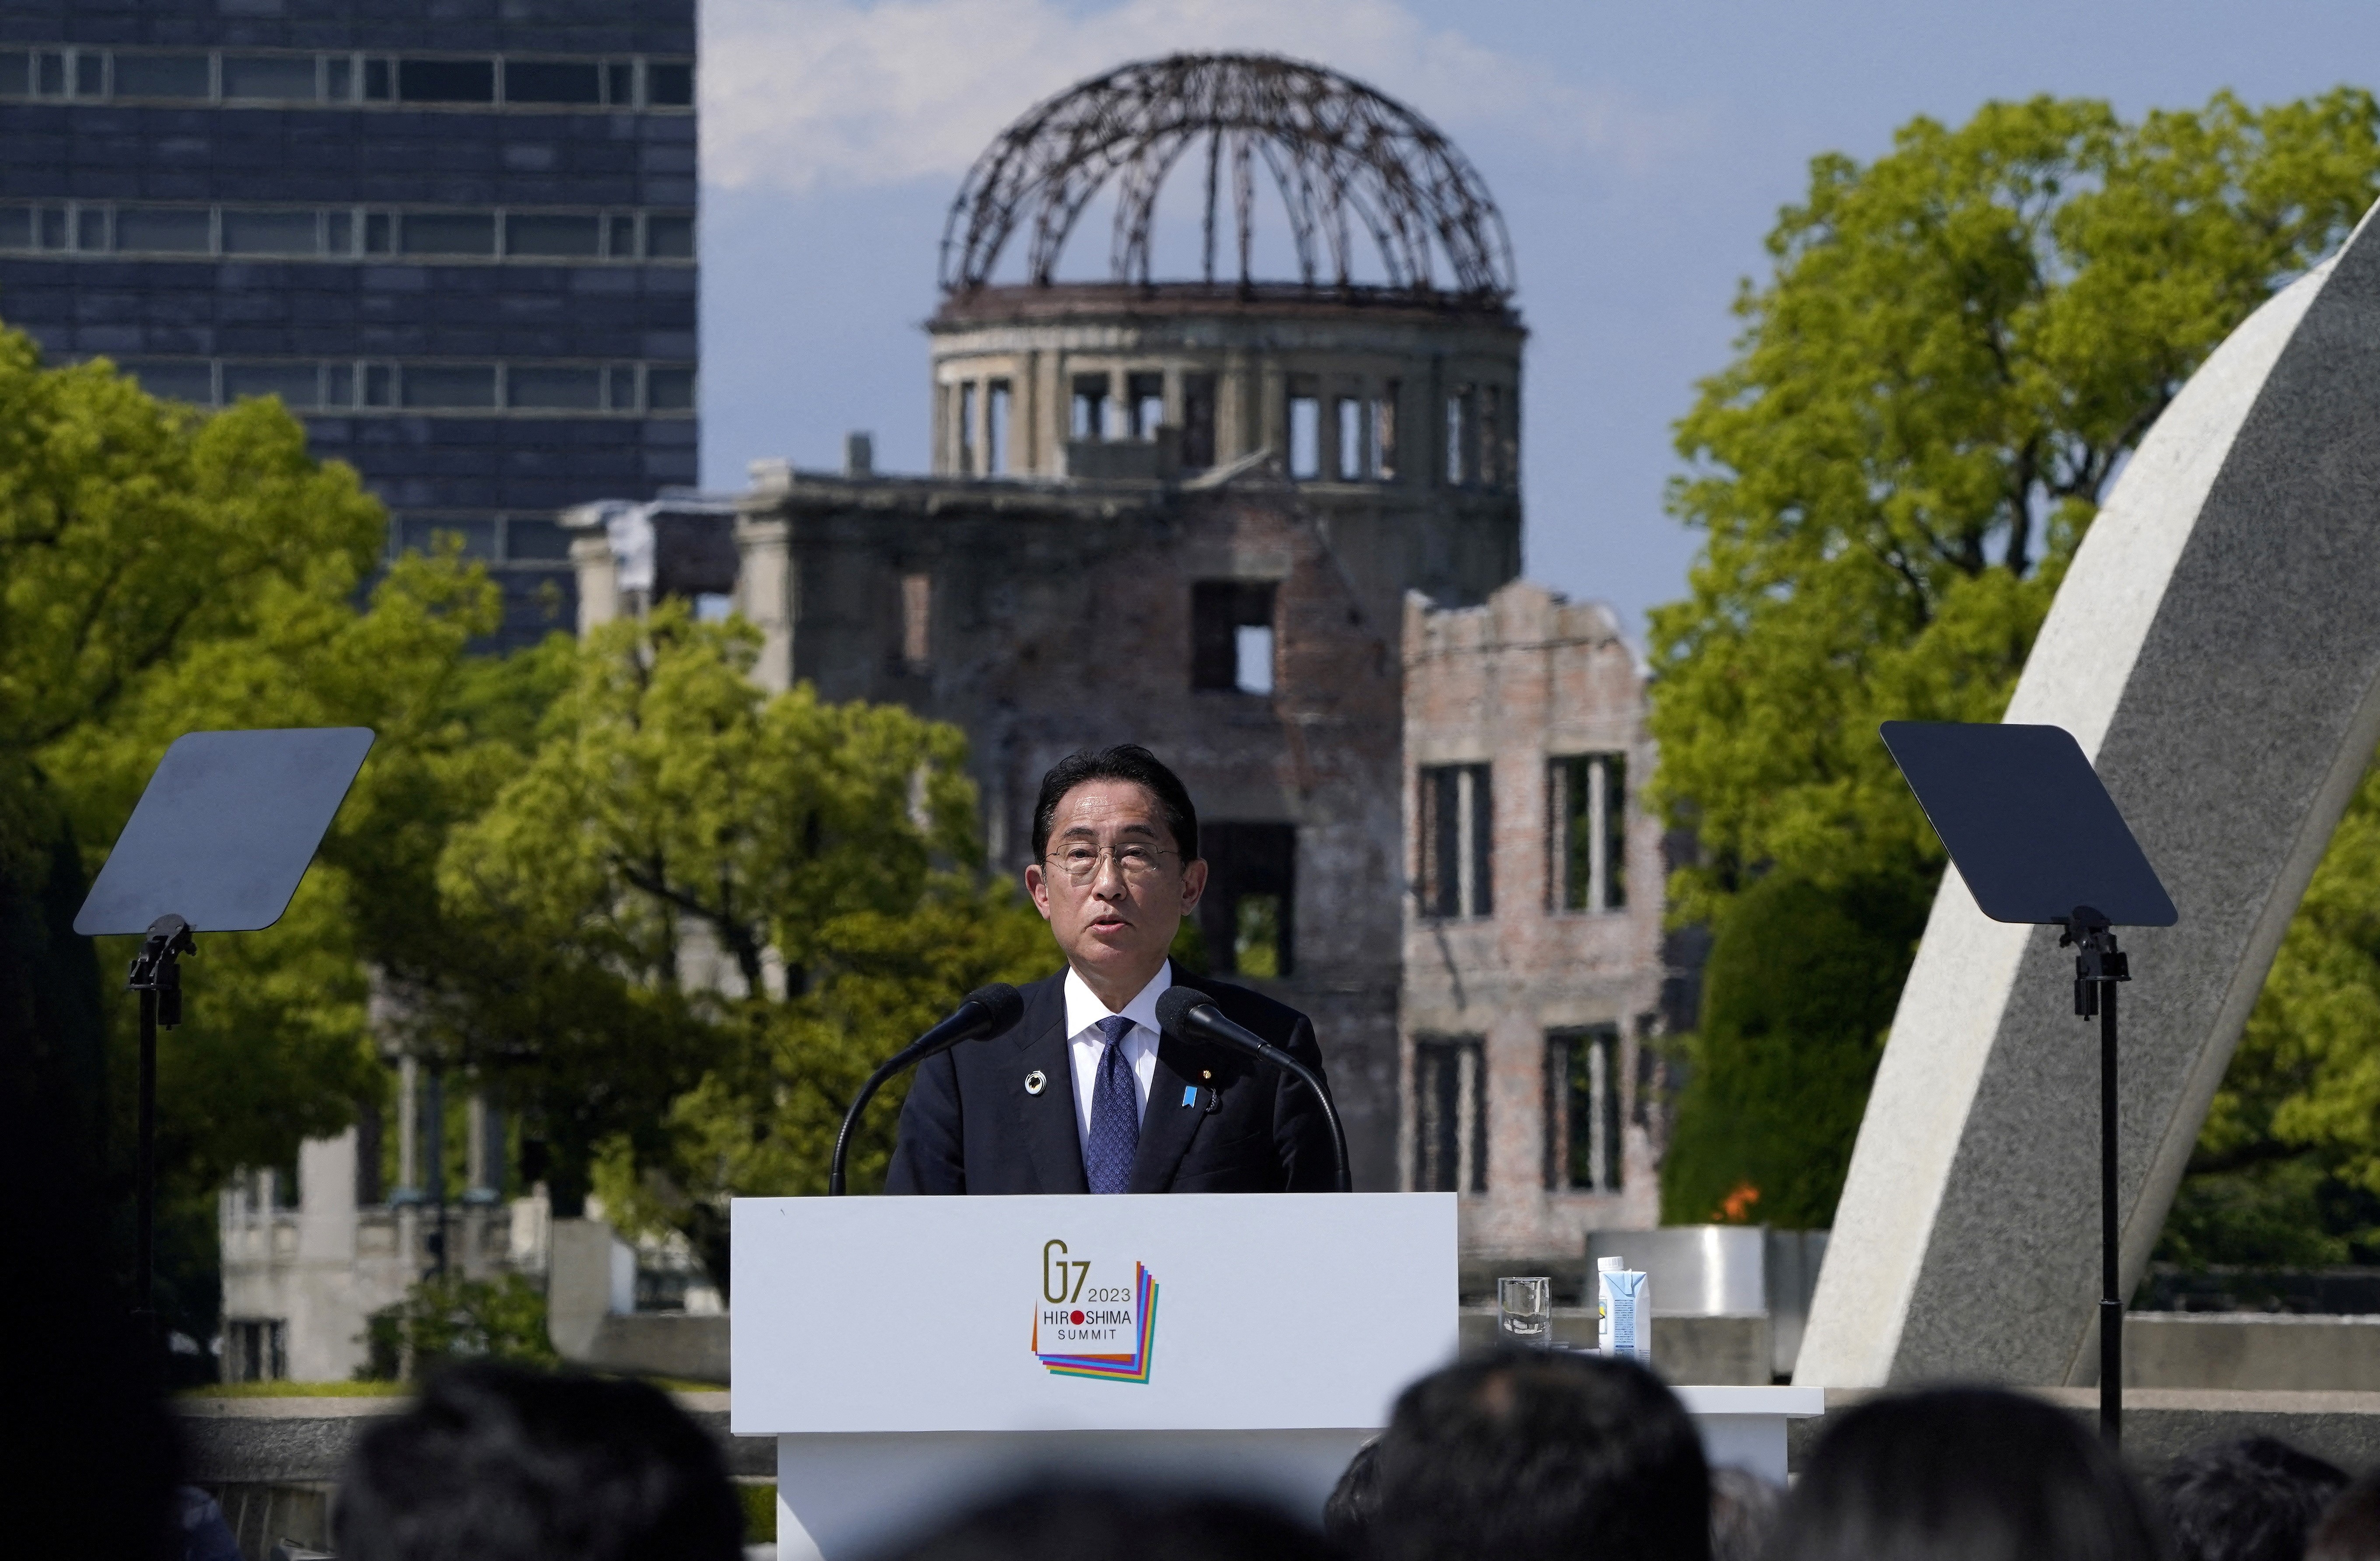 Japan’s Prime Minister Fumio Kishida speaks in front of the Cenotaph for Atomic Bomb Victims and the Atomic Bomb Dome in the Peace Memorial Park during the Presidency Press Conference of the G7 Hiroshima Summit in Hiroshima, Japan, 21 May 2023. Photo: Reuters